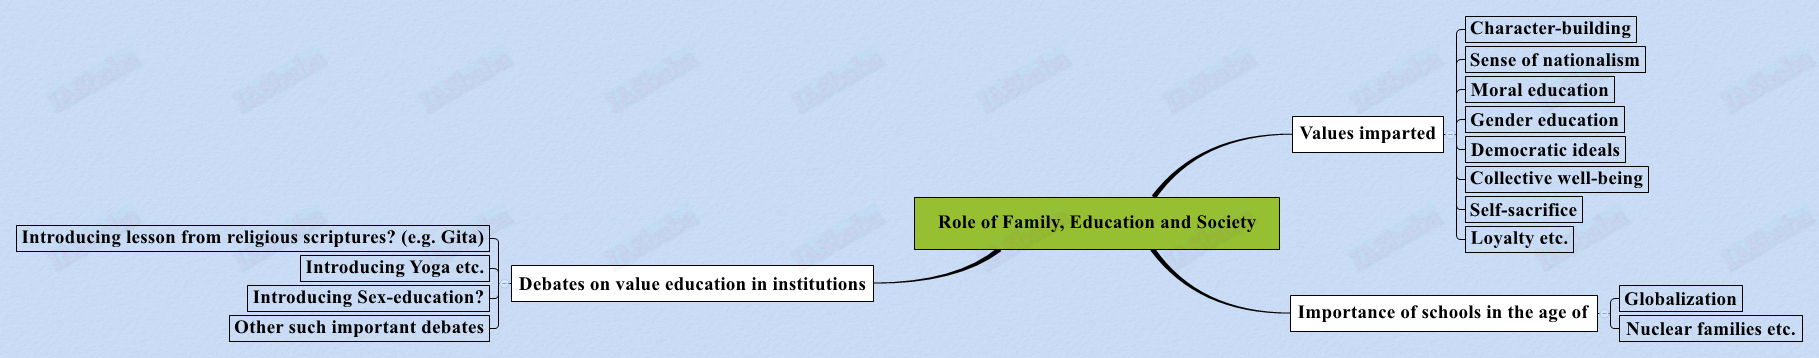 Role of Family, Education and Society